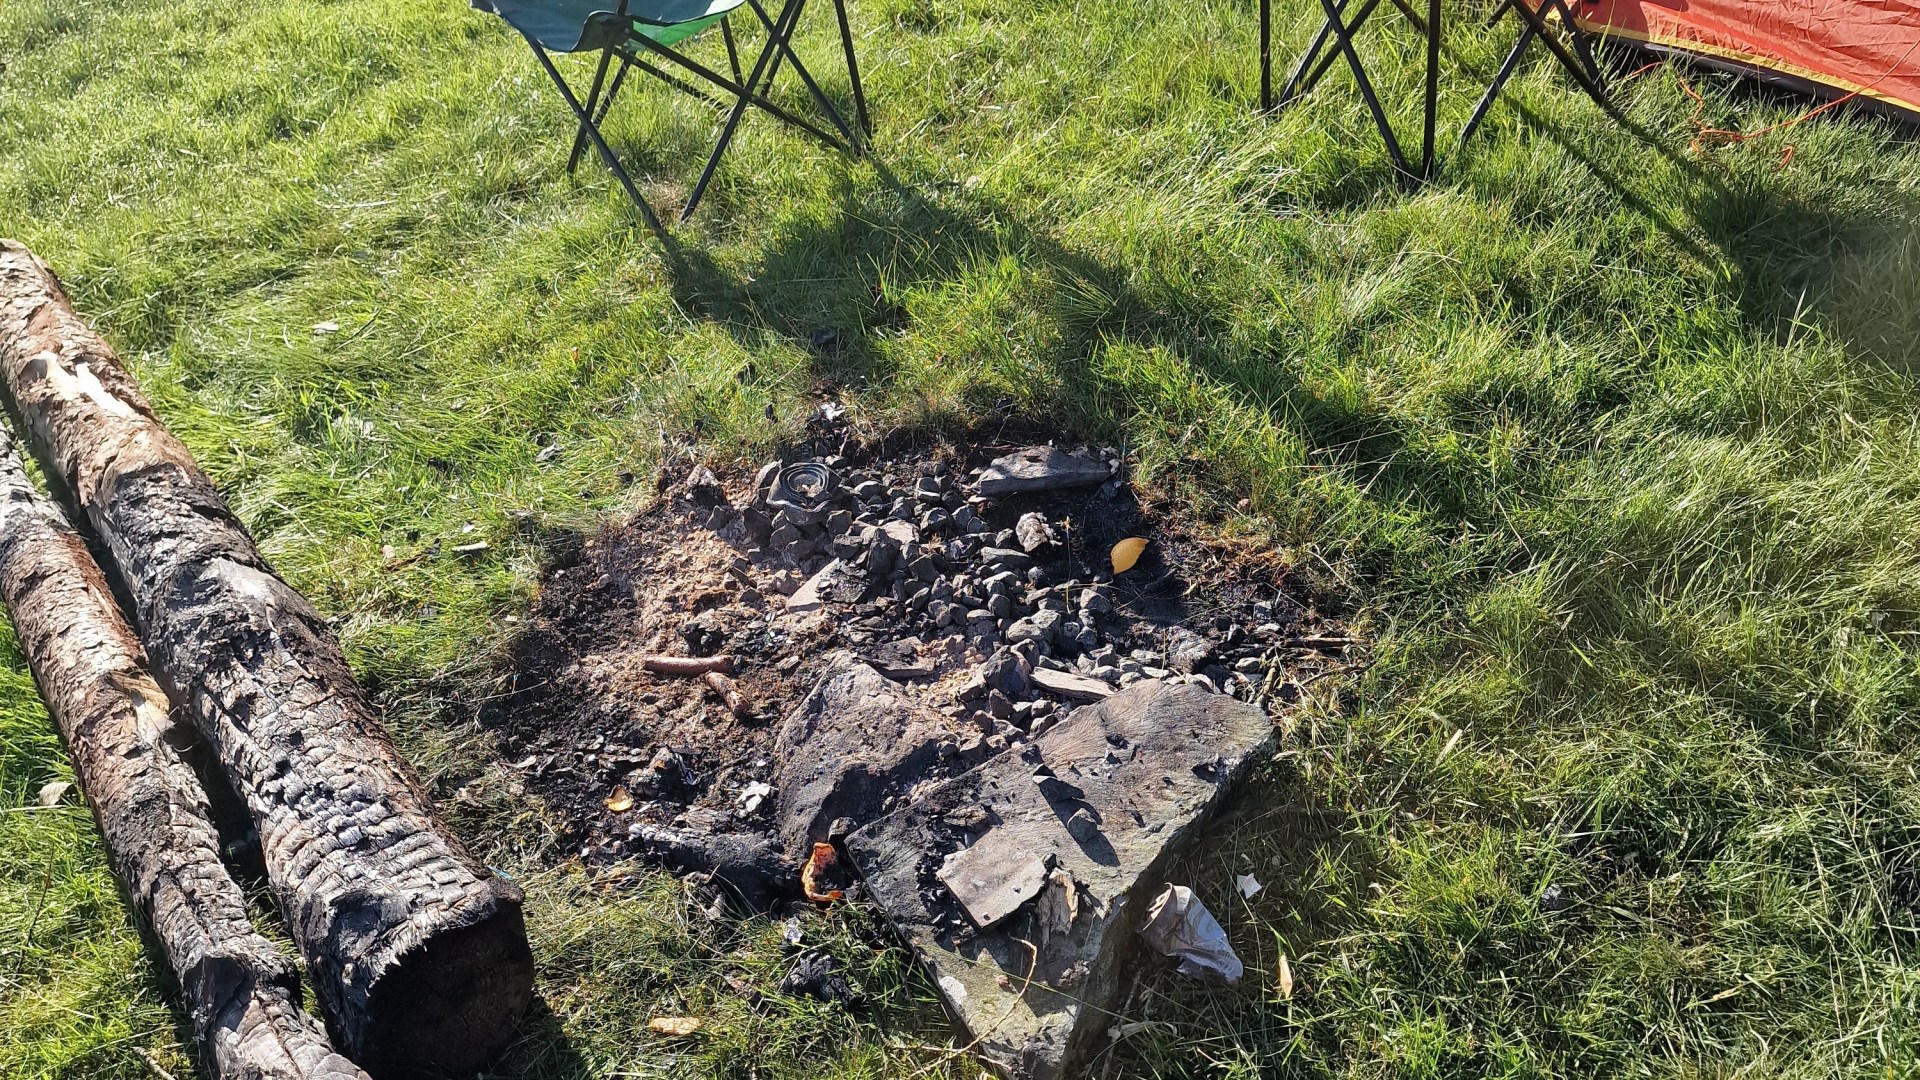 Aggressive tourists hosting wild campsite parties leave our fields scorched with their BBQs & litter strewn everywhere [Video]